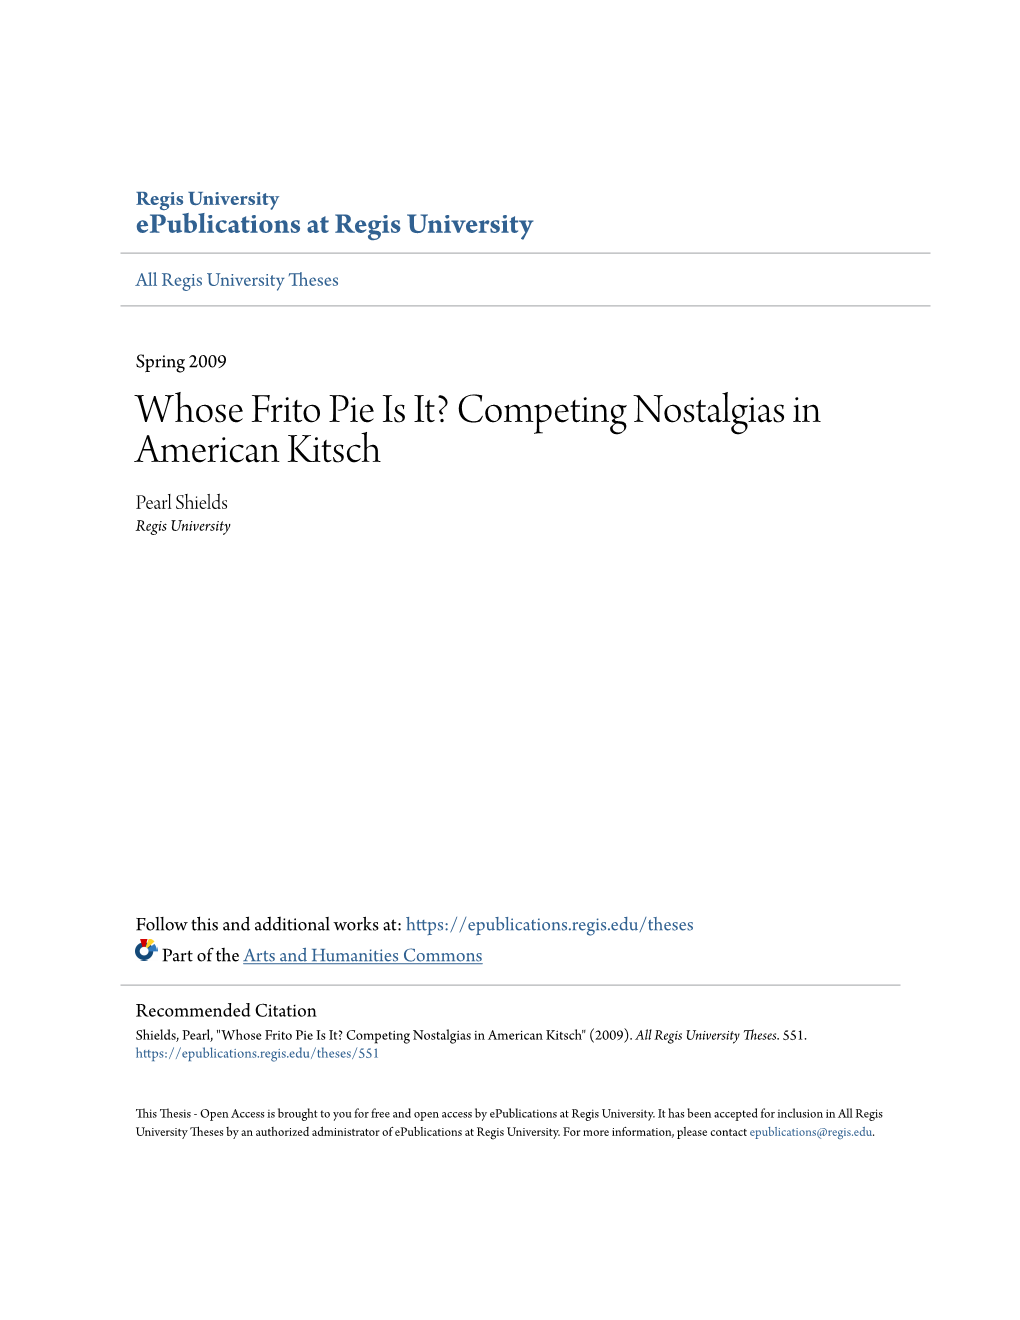 Whose Frito Pie Is It? Competing Nostalgias in American Kitsch Pearl Shields Regis University